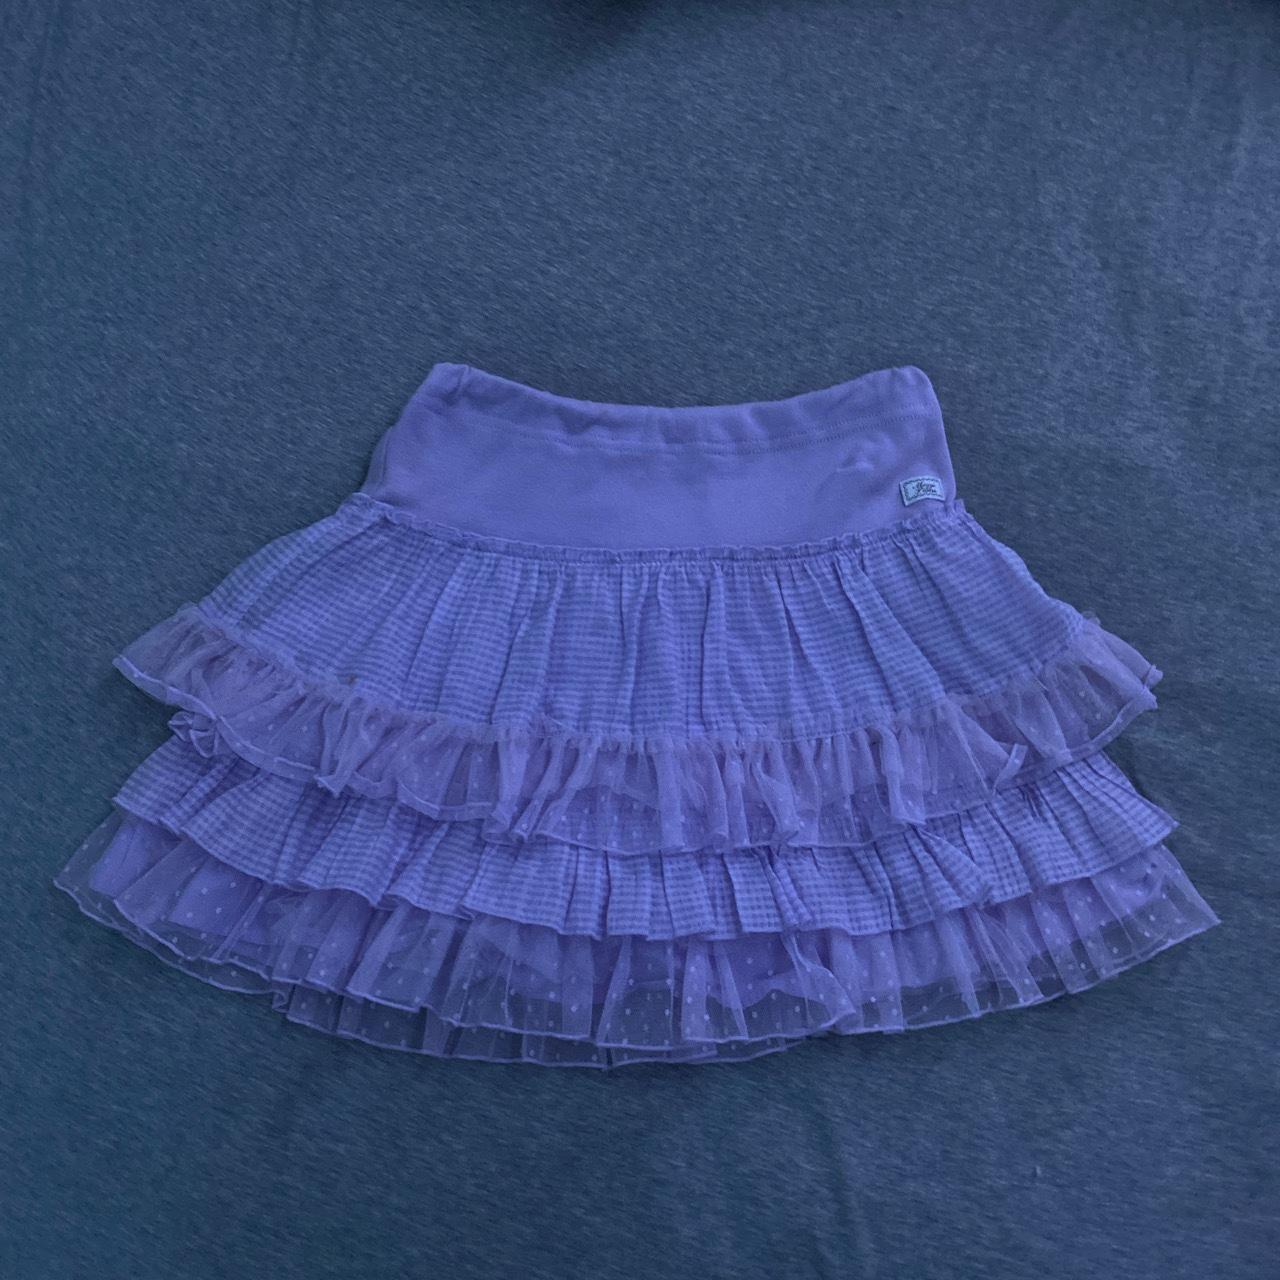 🍩Mezzo Piano ruffled purple skirt with frilled lace... - Depop